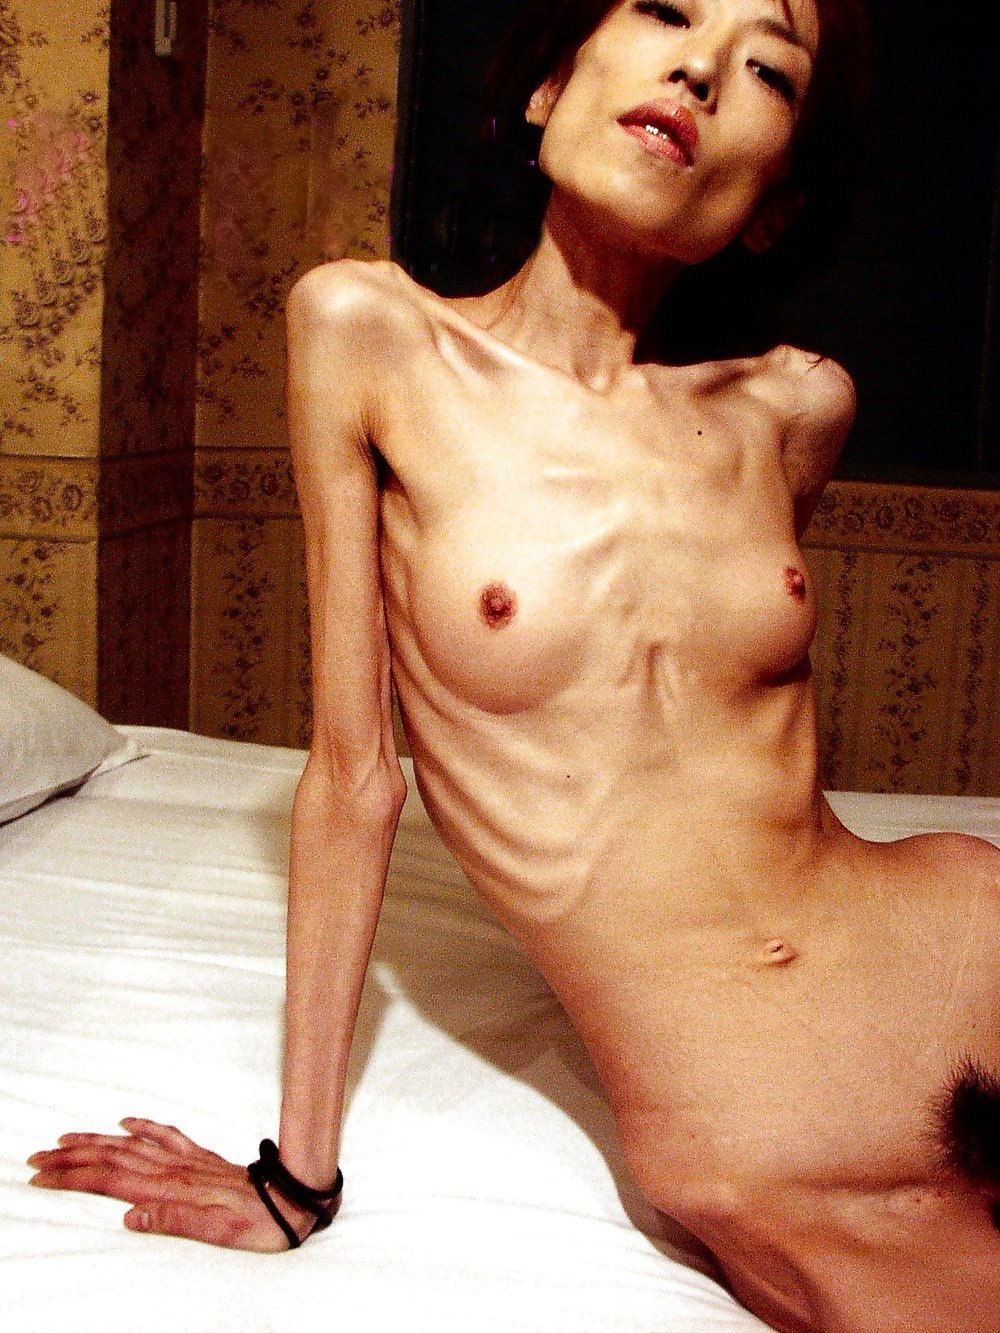 Extreme Anorexic Nude - Anorexic Nude - 57 photos